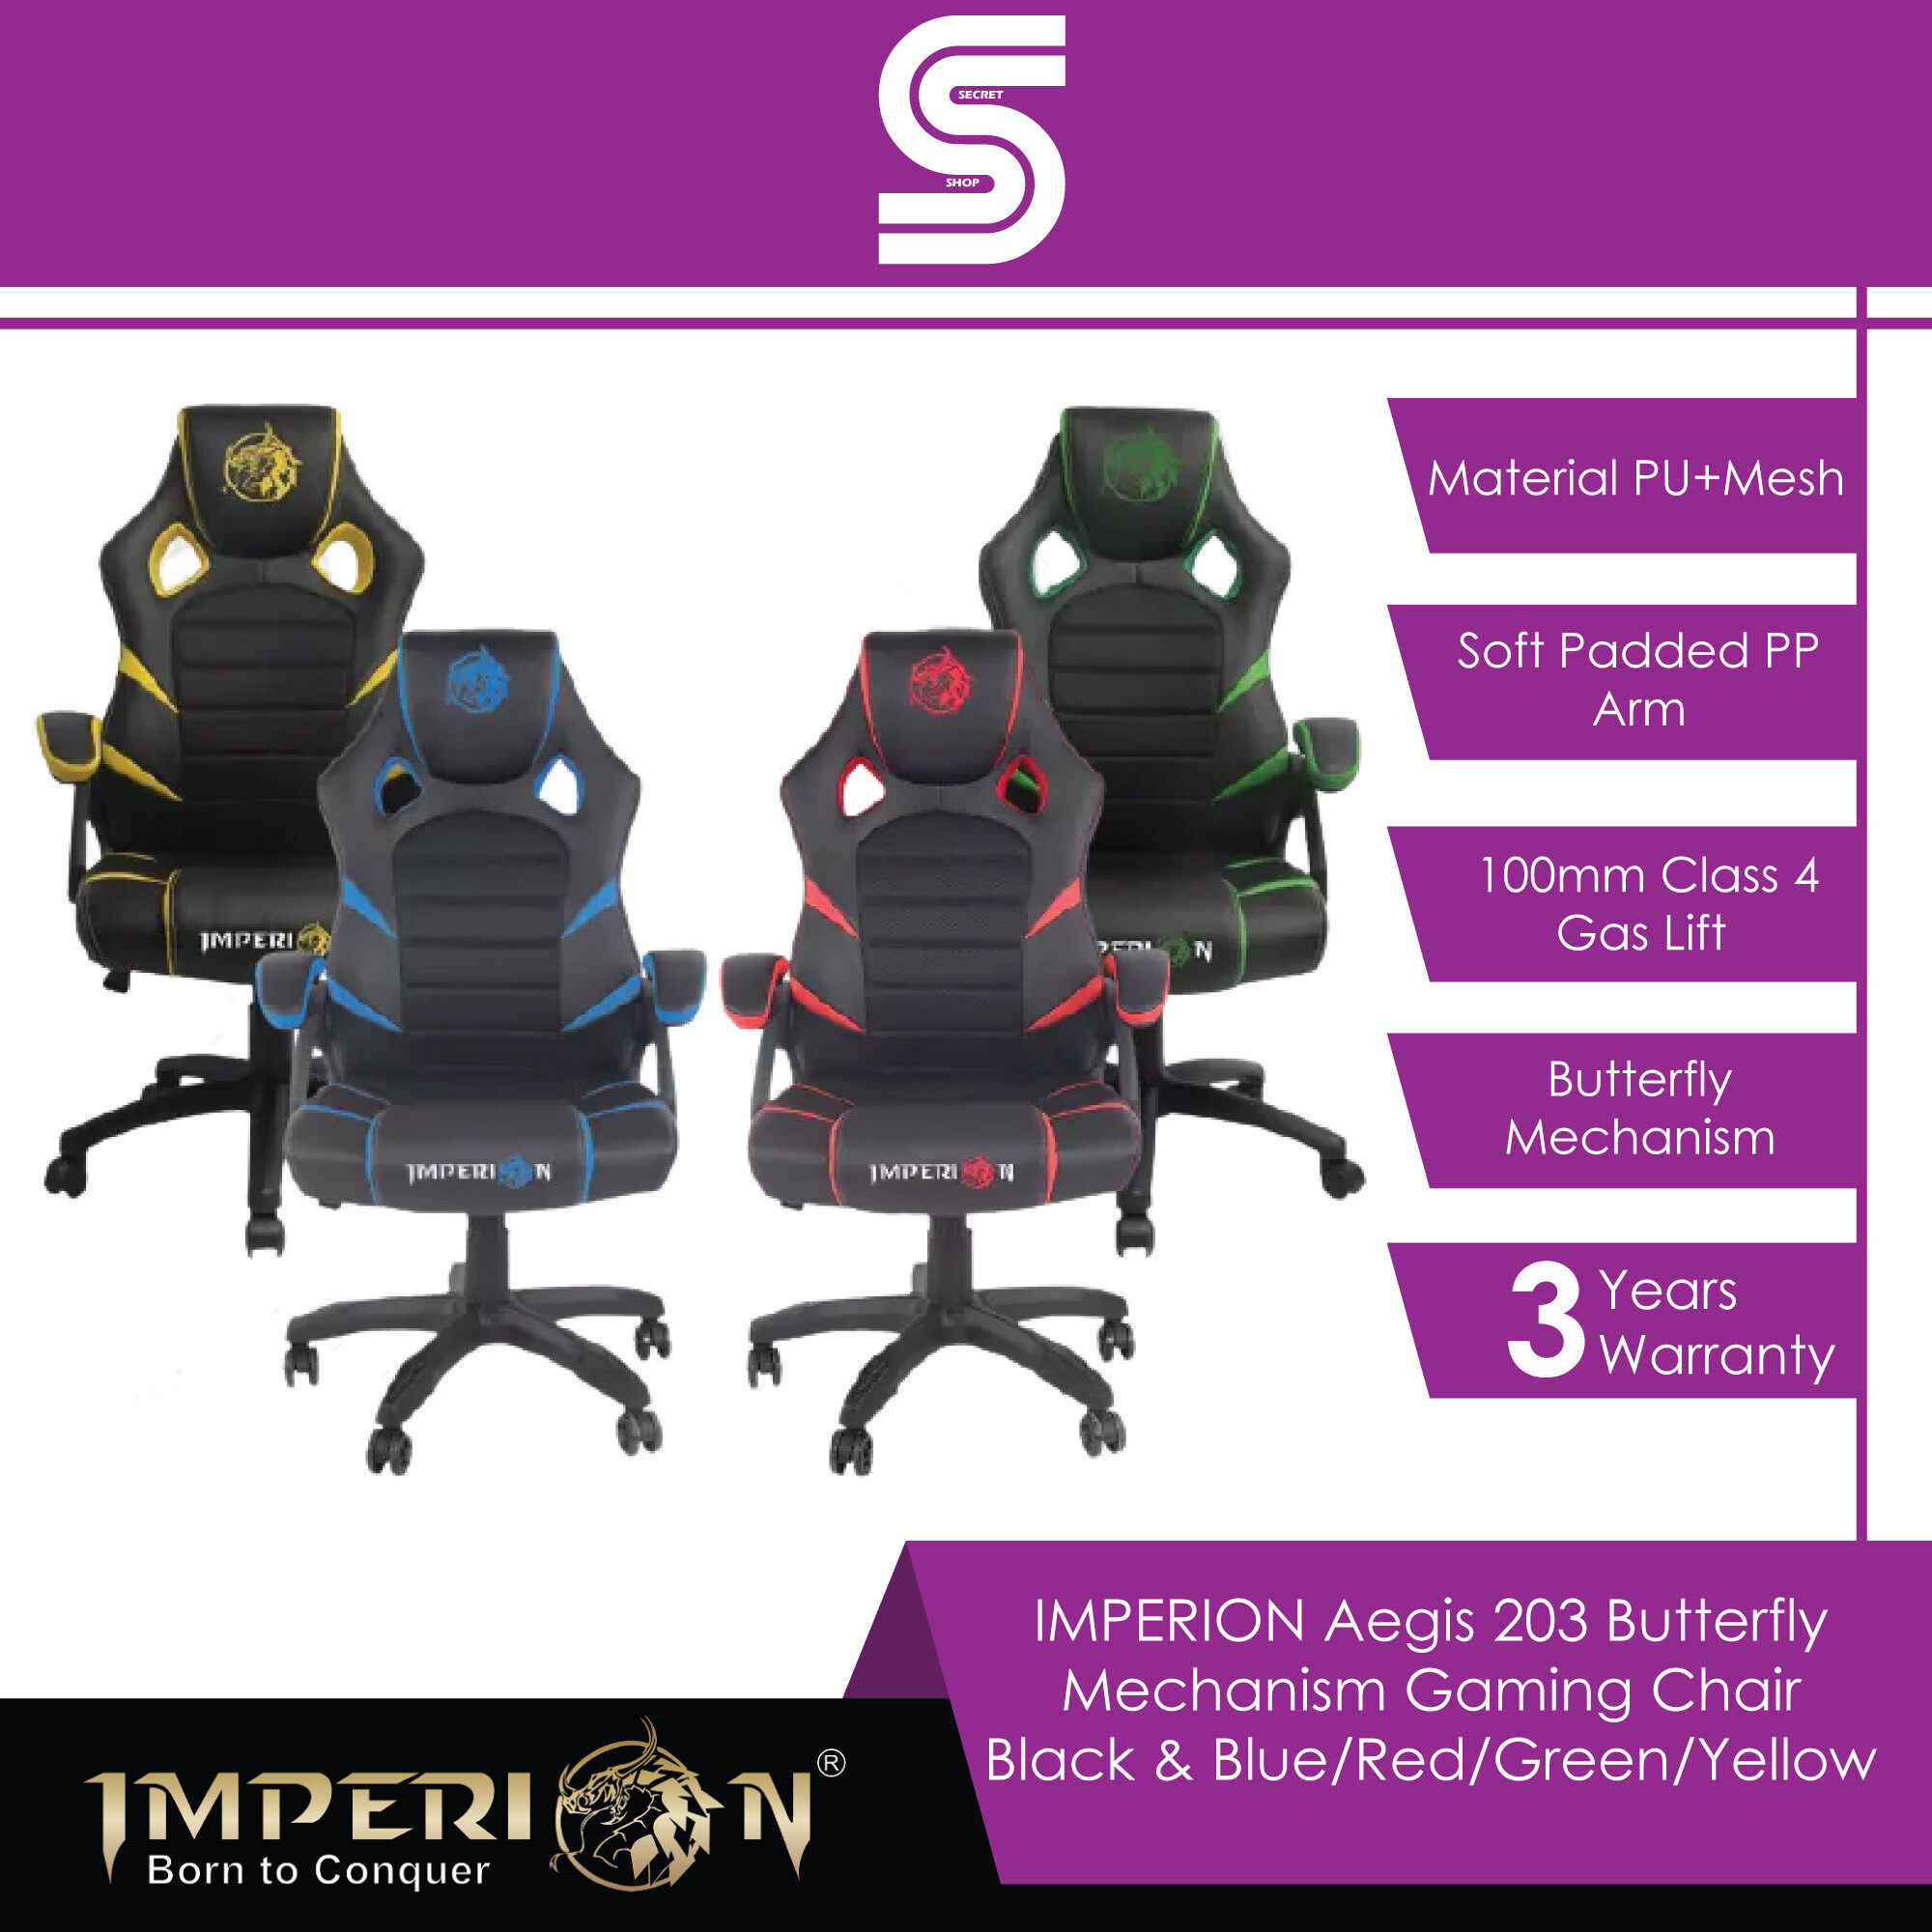 IMPERION Aegis 203 Butterfly Mechanism Gaming Chair - Black & Blue/Red/Green/Yellow